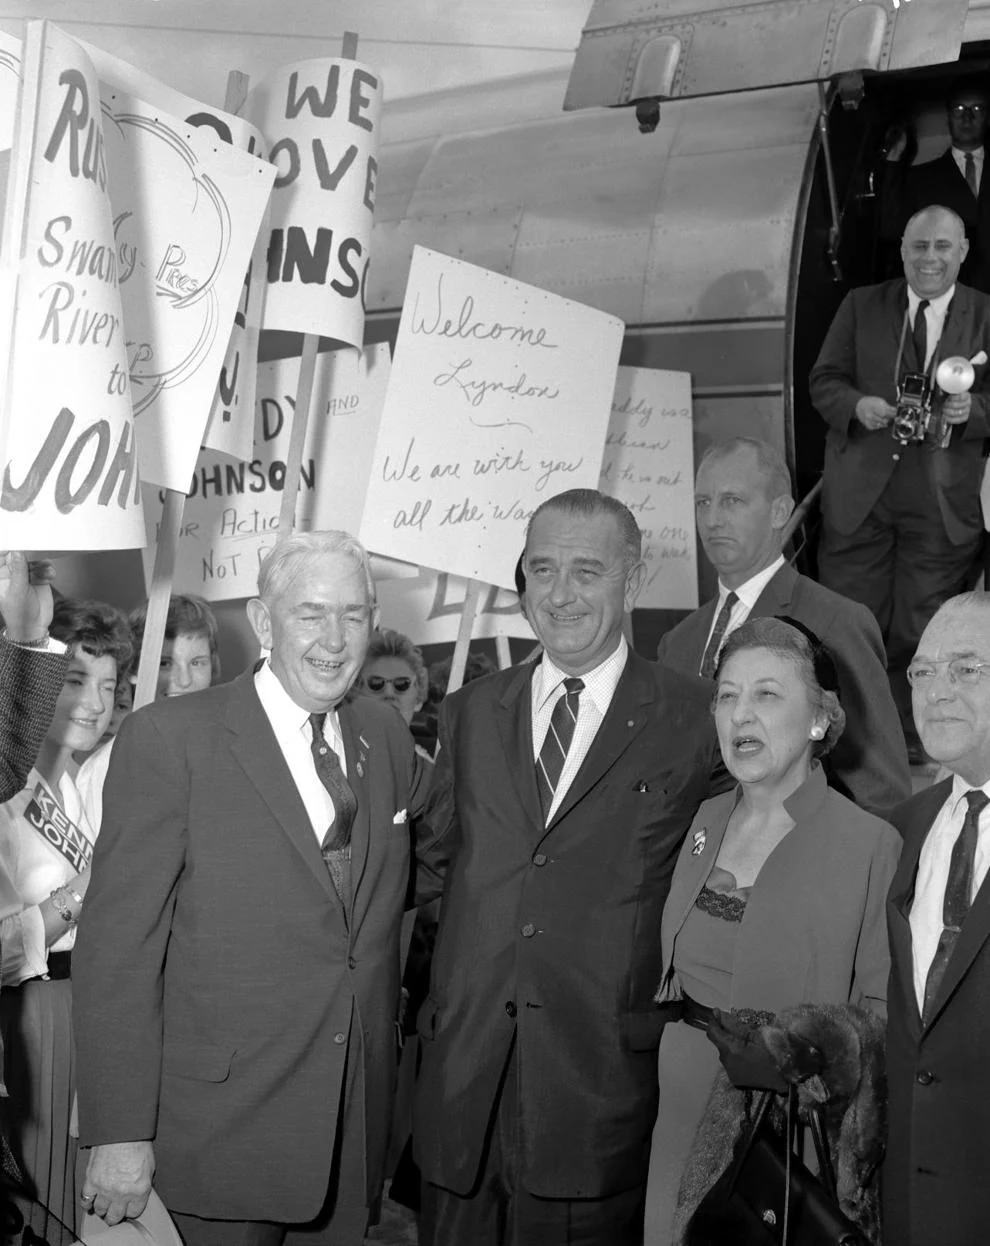 Sen. Lyndon B. Johnson (center) arrived in Richmond to campaign for the Kennedy-Johnson ticket ahead of the November presidential election, 1960.